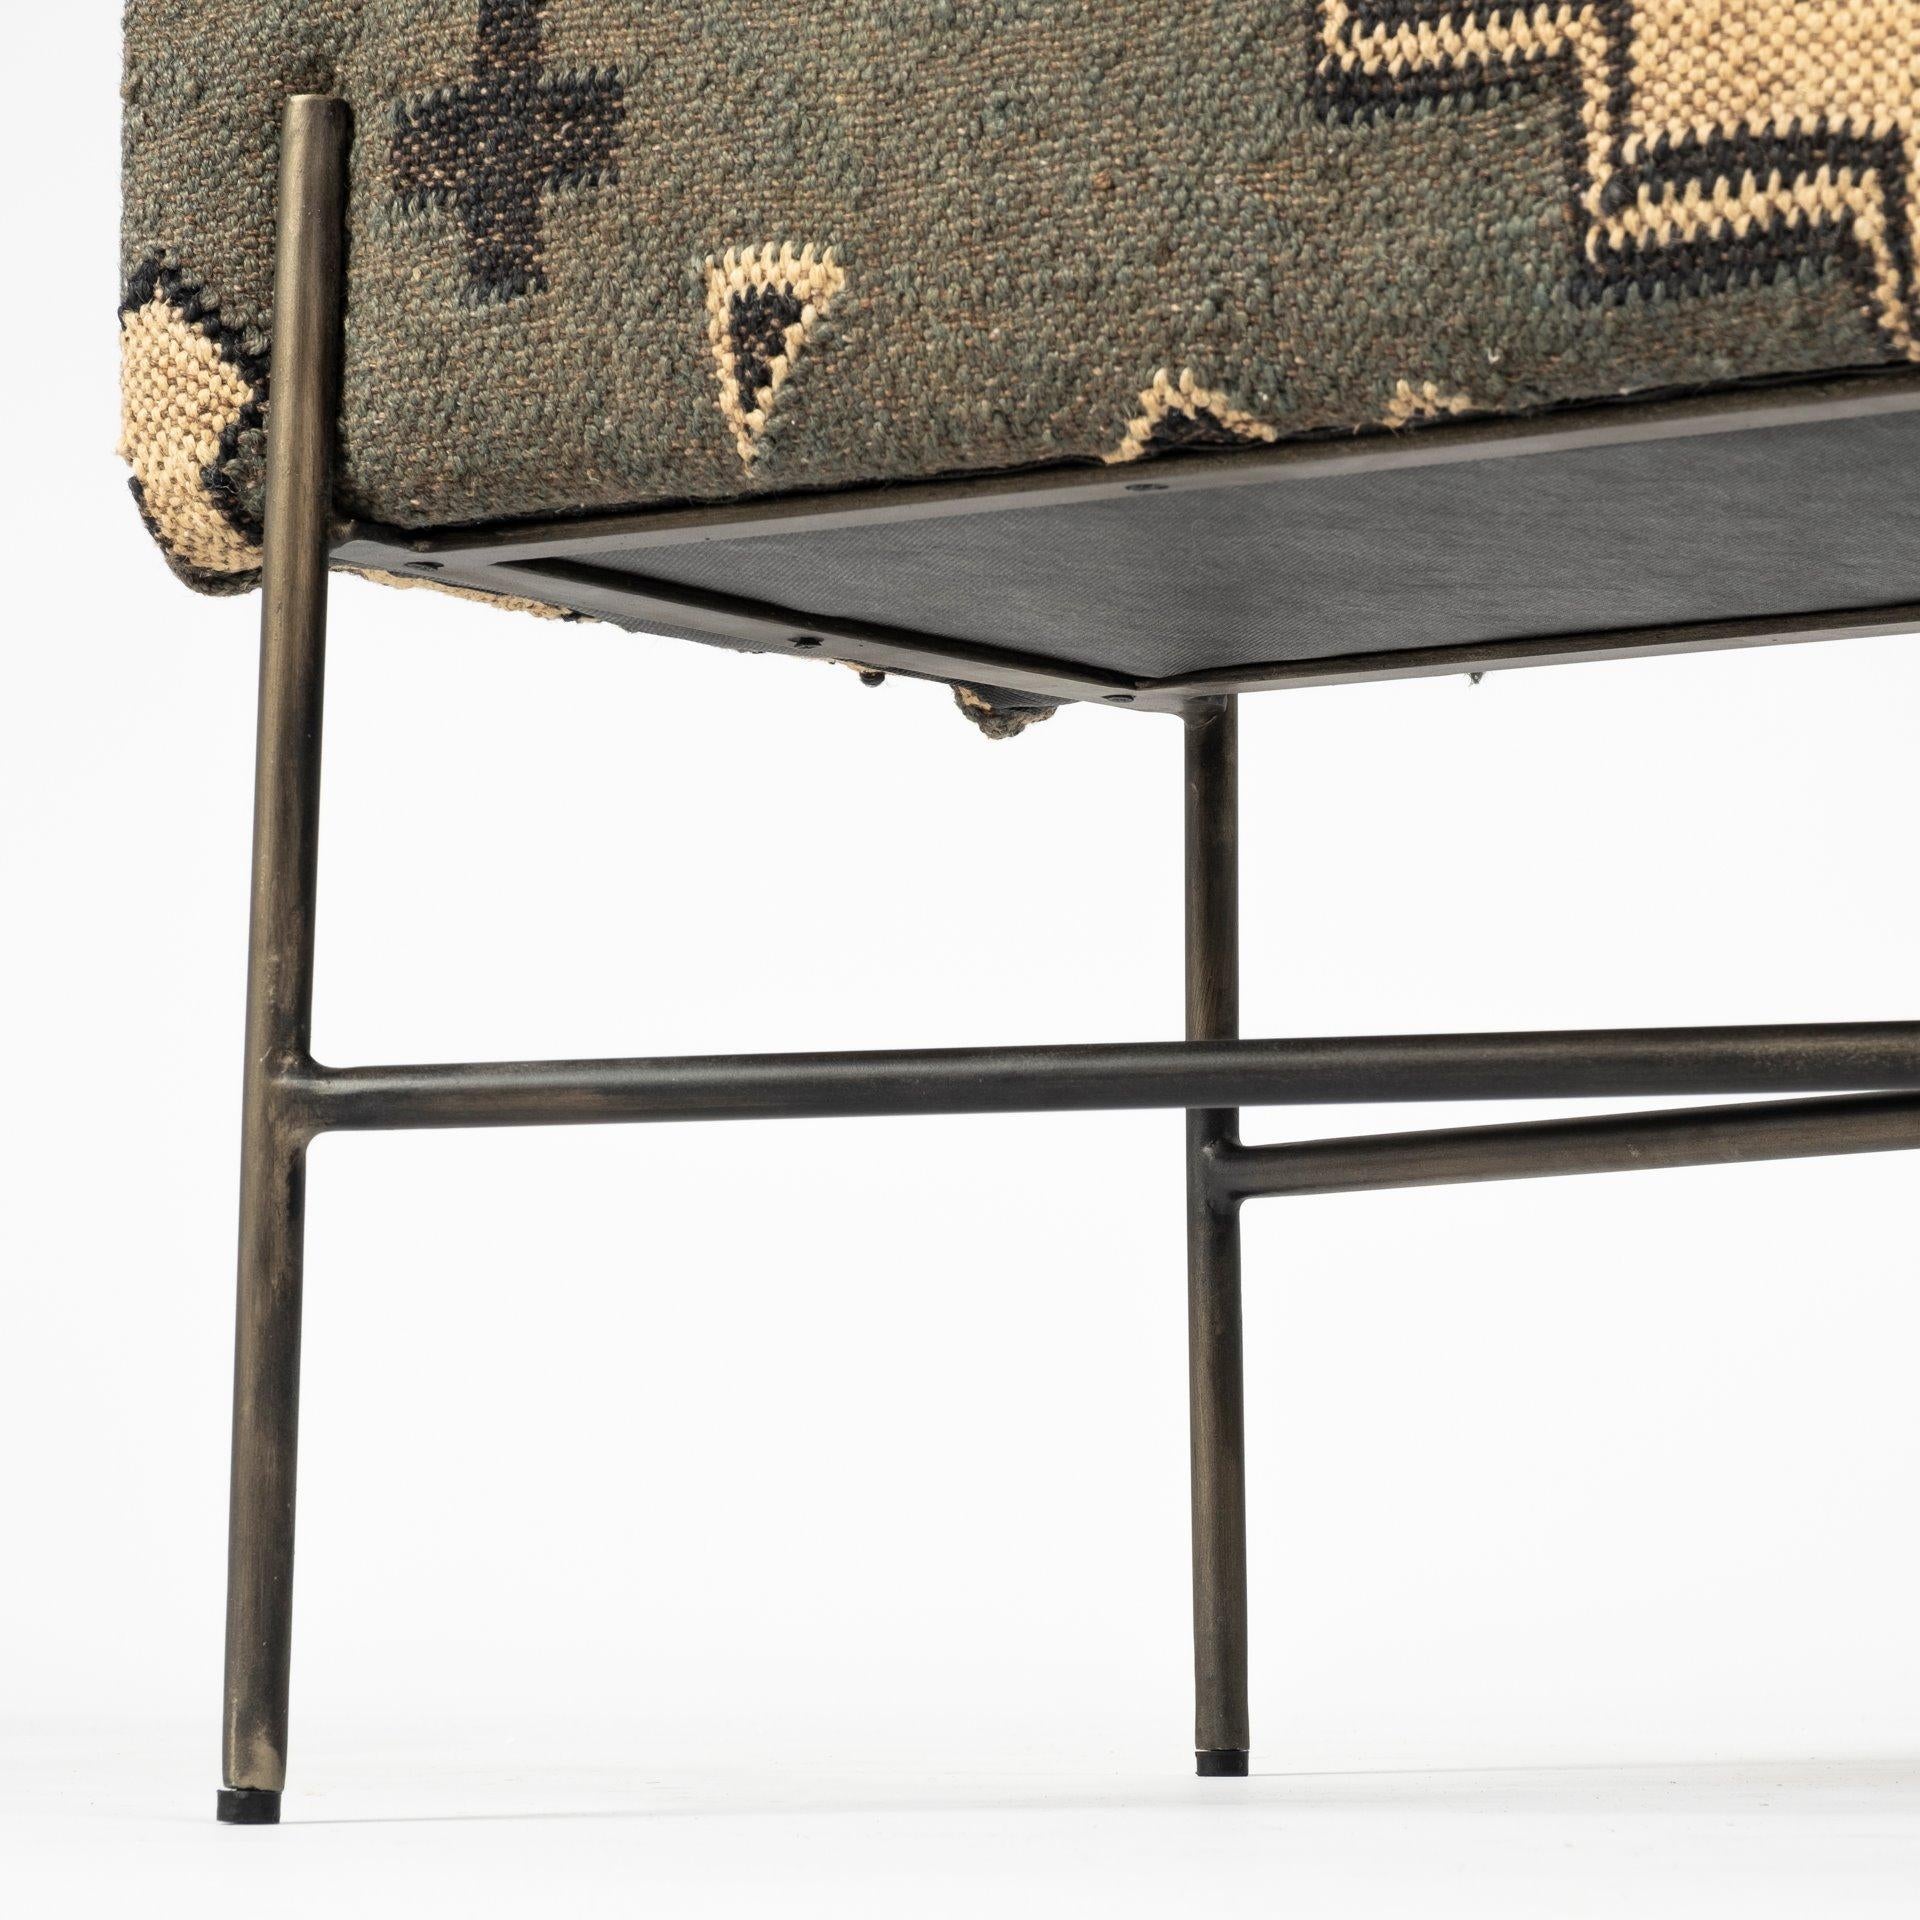 Rectangular MetalAntiqued-Nickel Toned Base W Upholstered Tan Pattered Seat Accent Bench